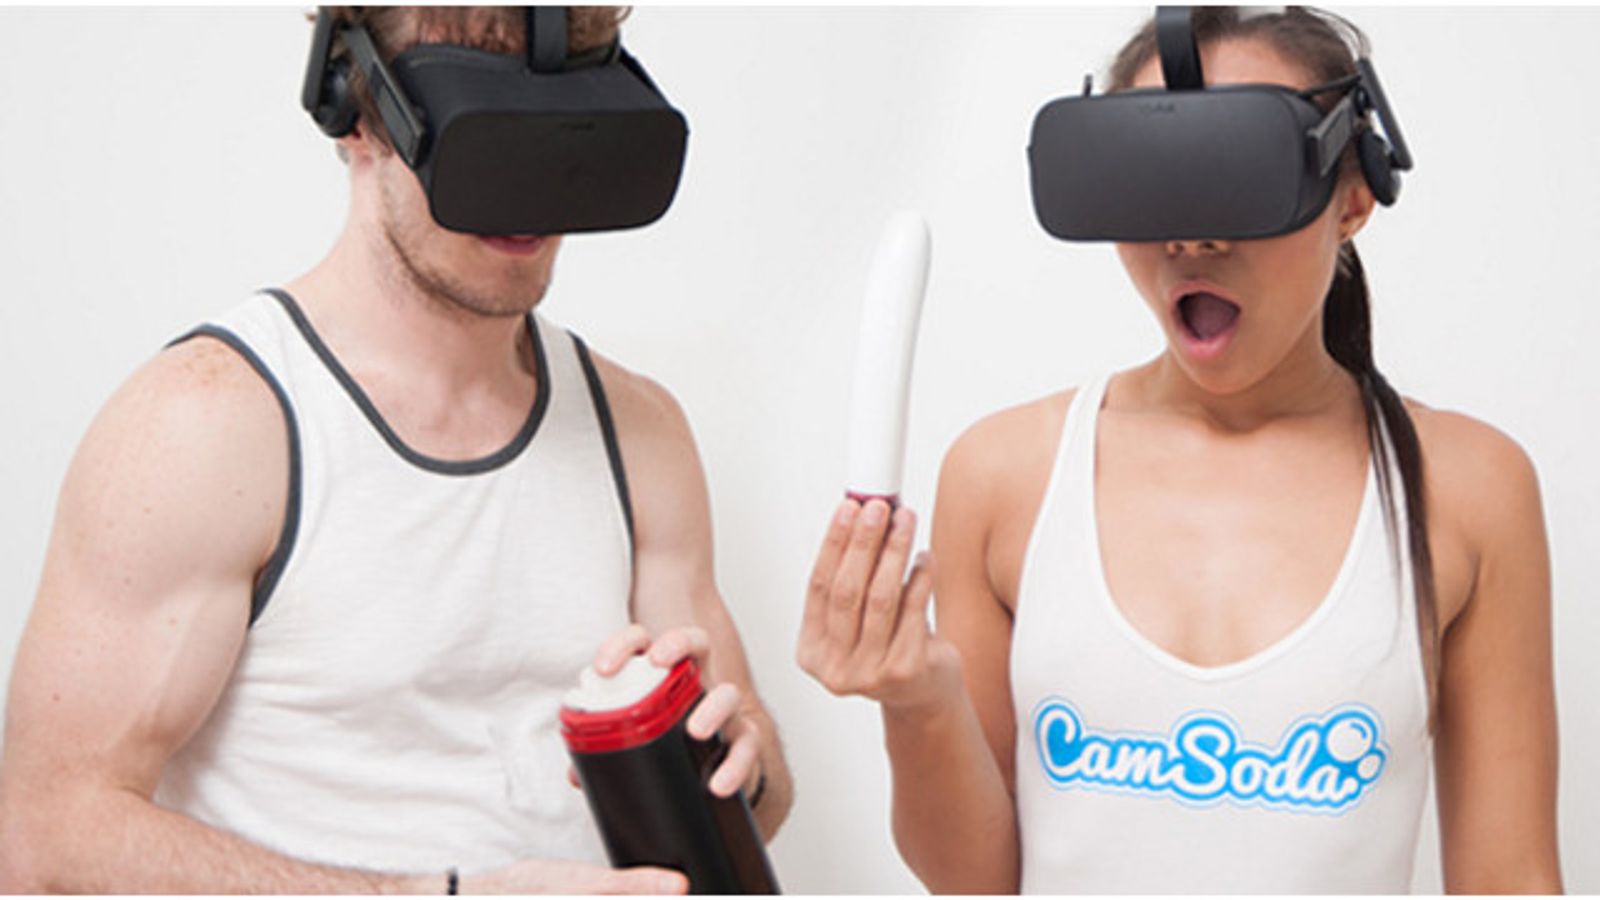 CamSoda to Launch VR Experience With Teledildonics